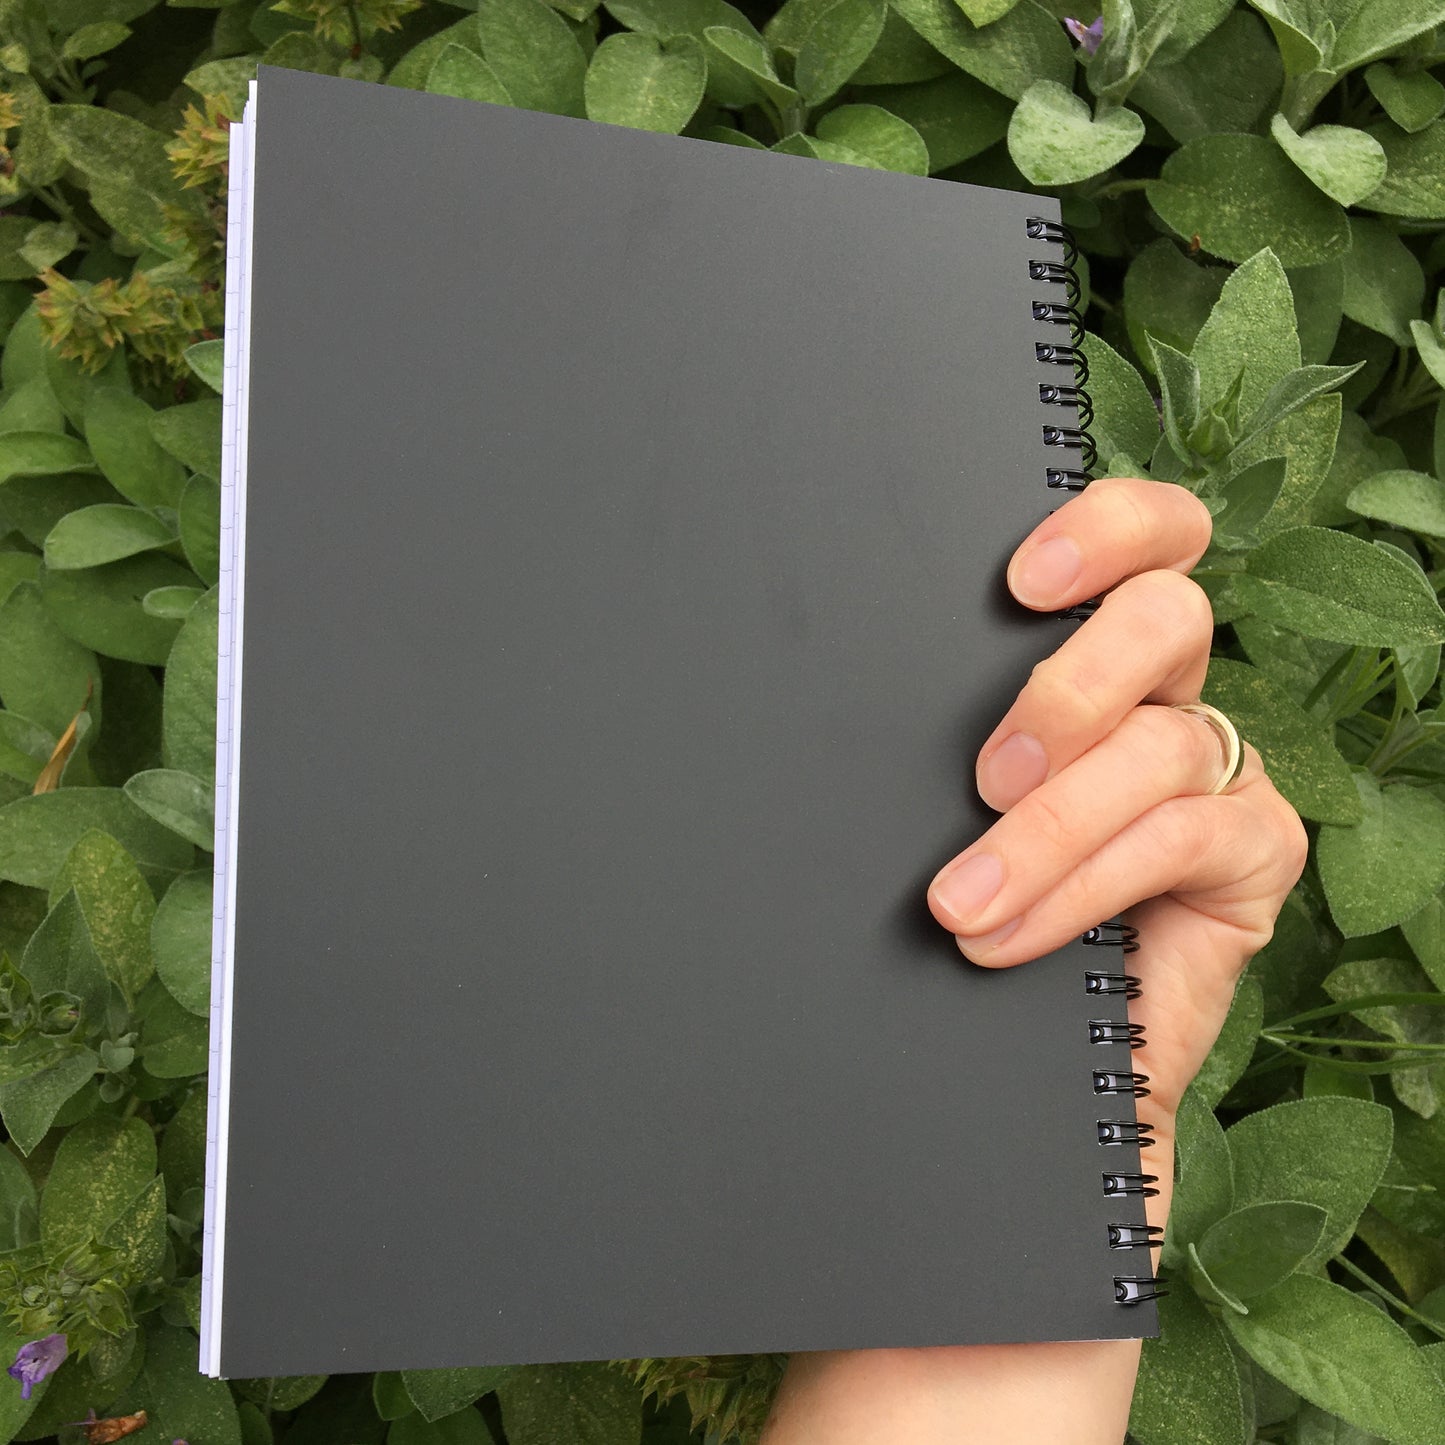 A spiral notebook held in a hand showing the black back cover.